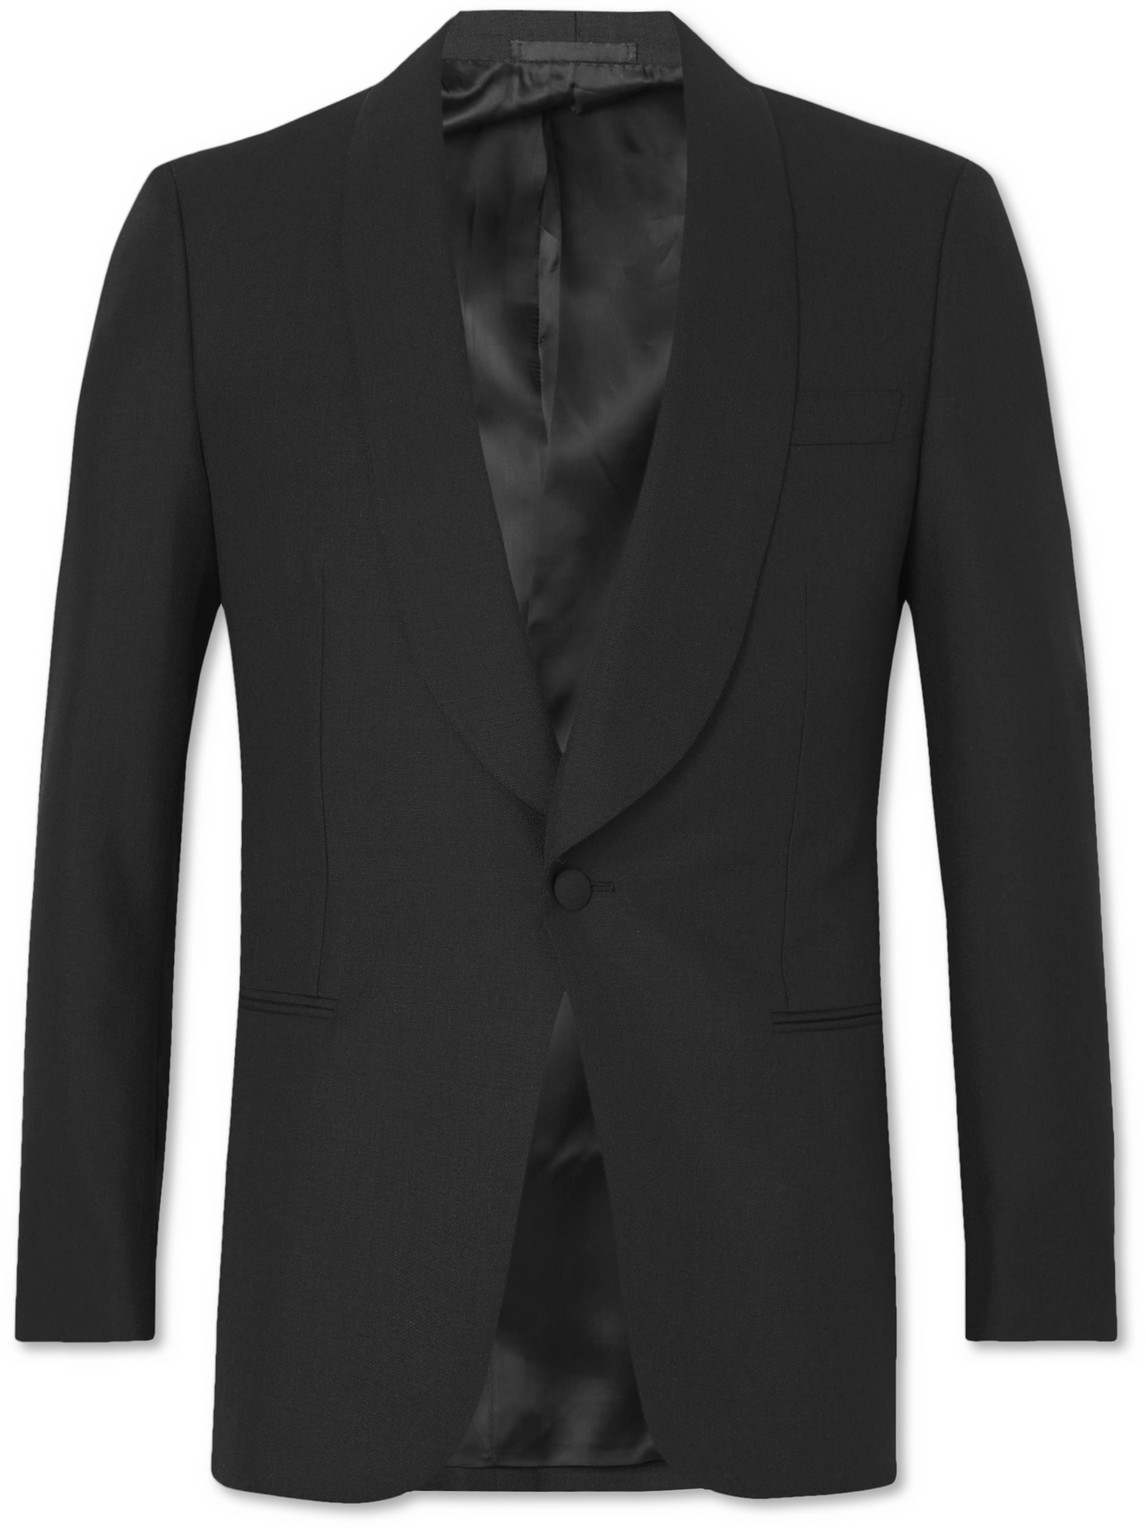 Harry Wool and Mohair-Blend Tuxedo Jacket